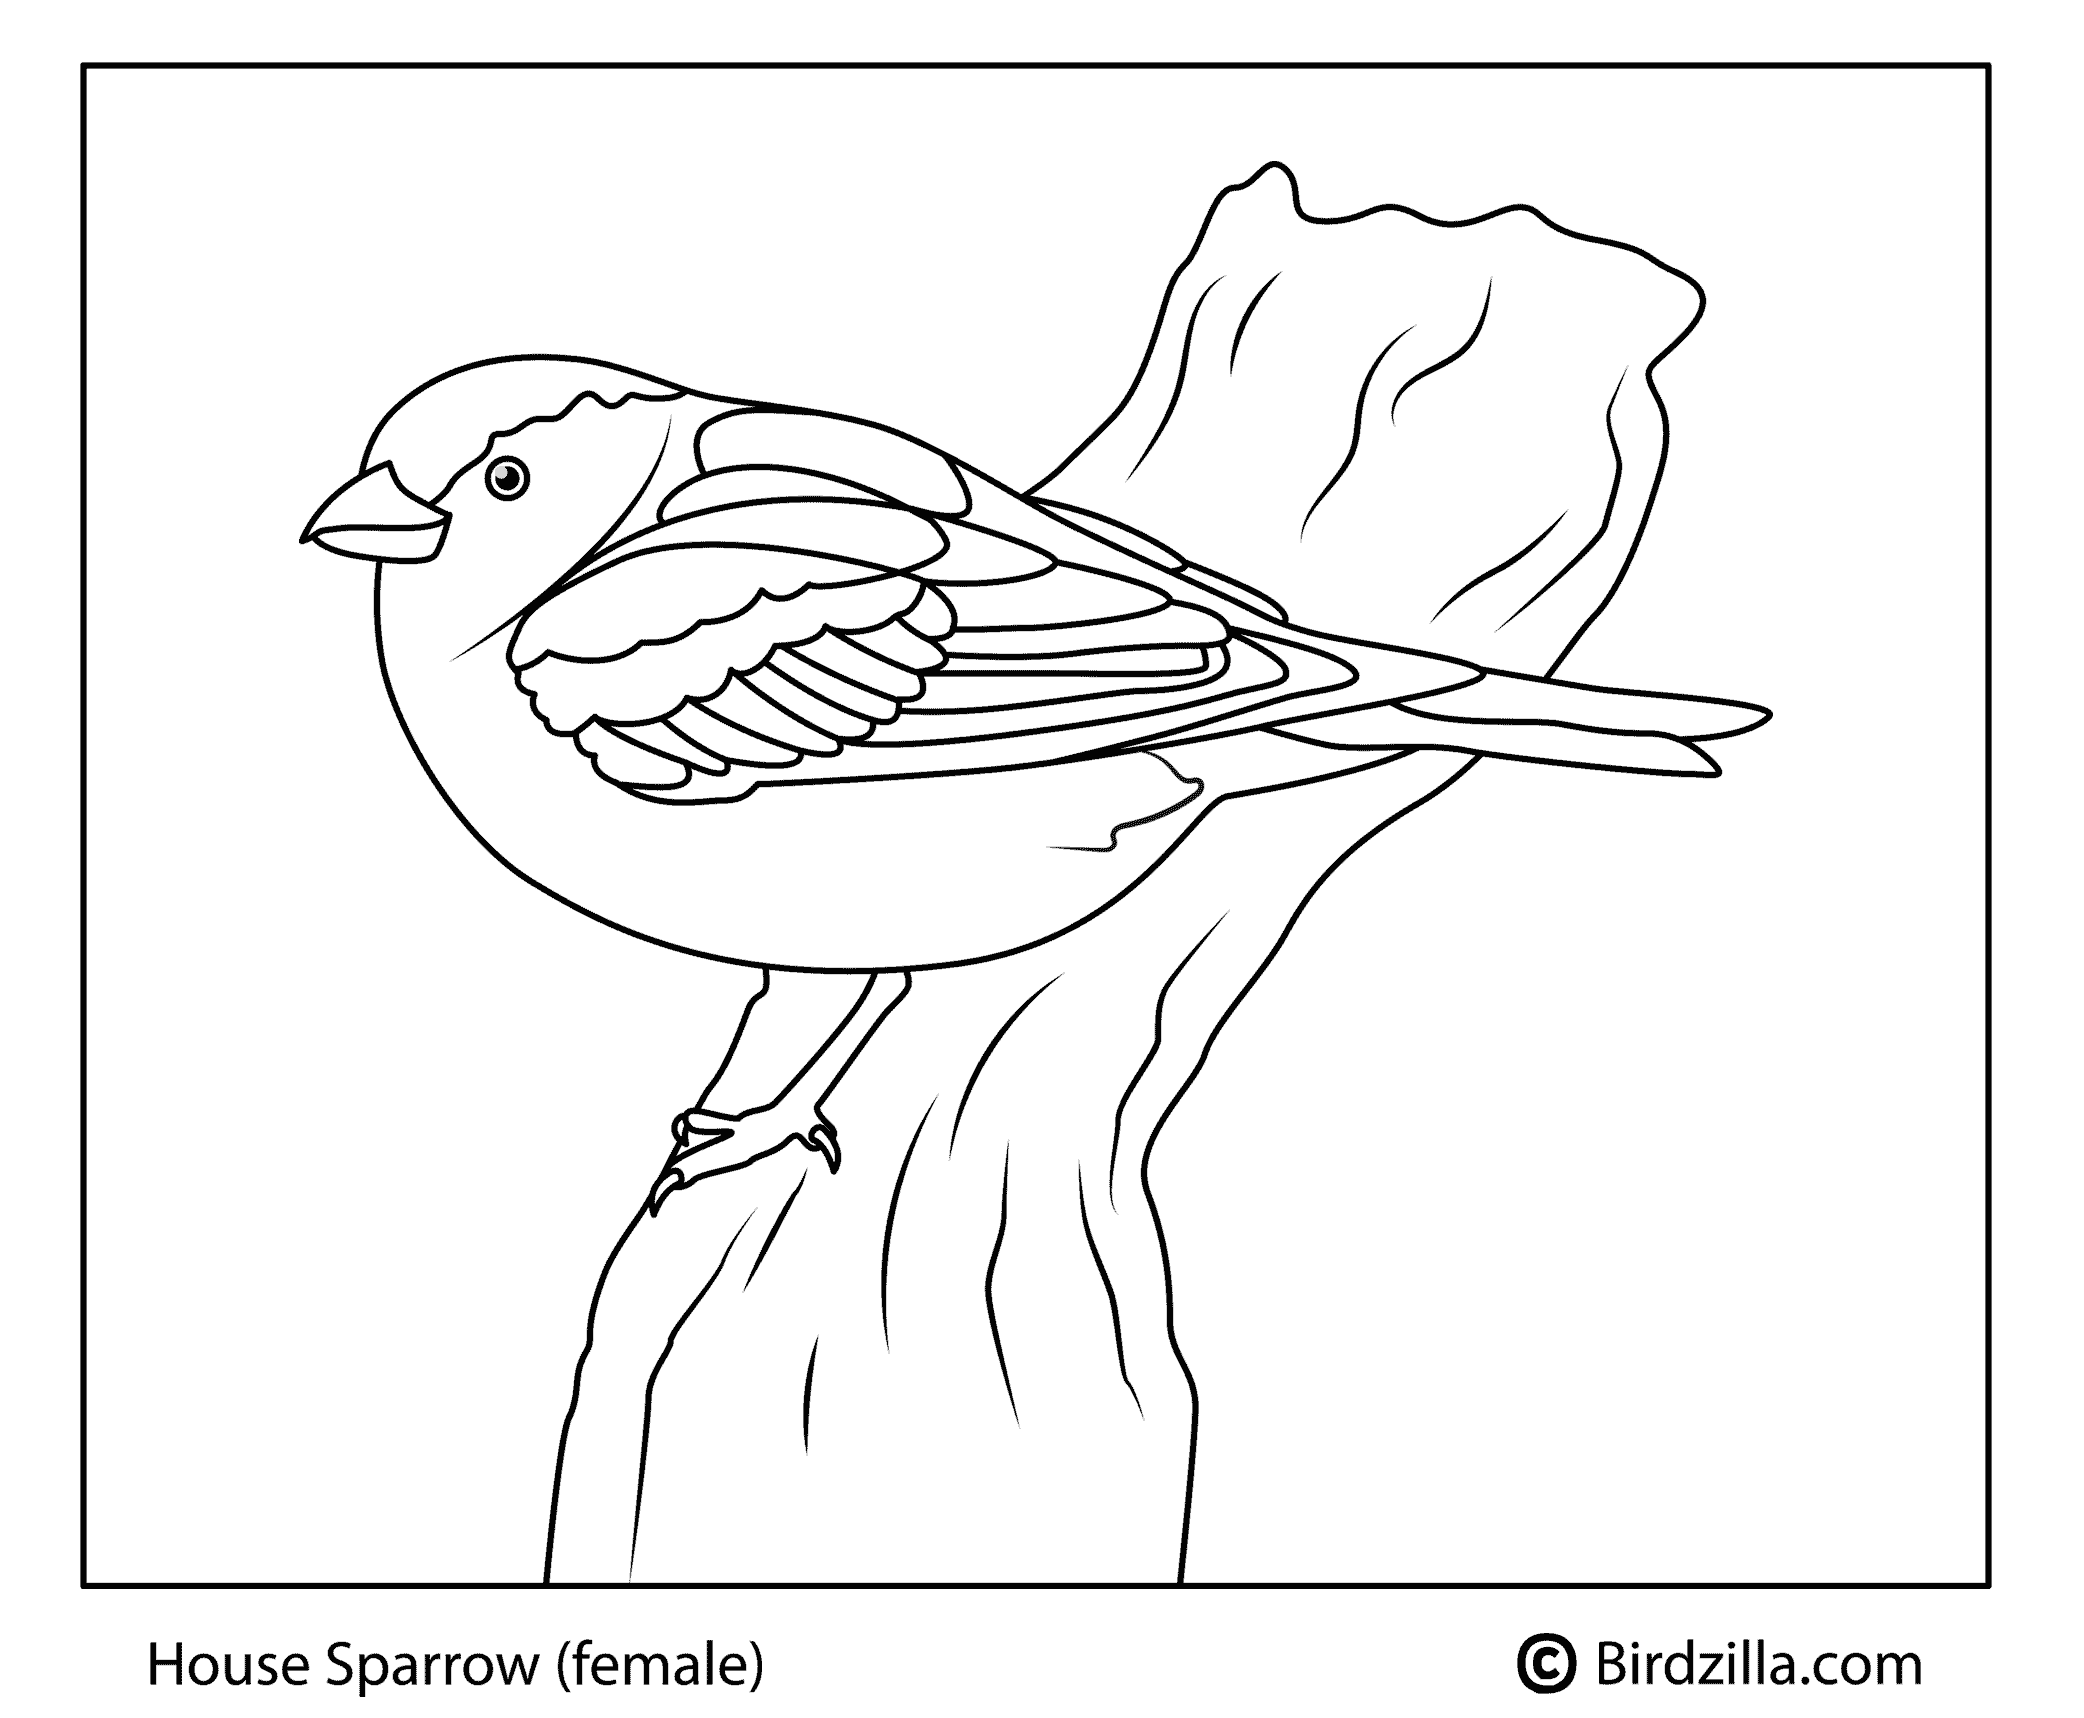 House sparrow coloring page